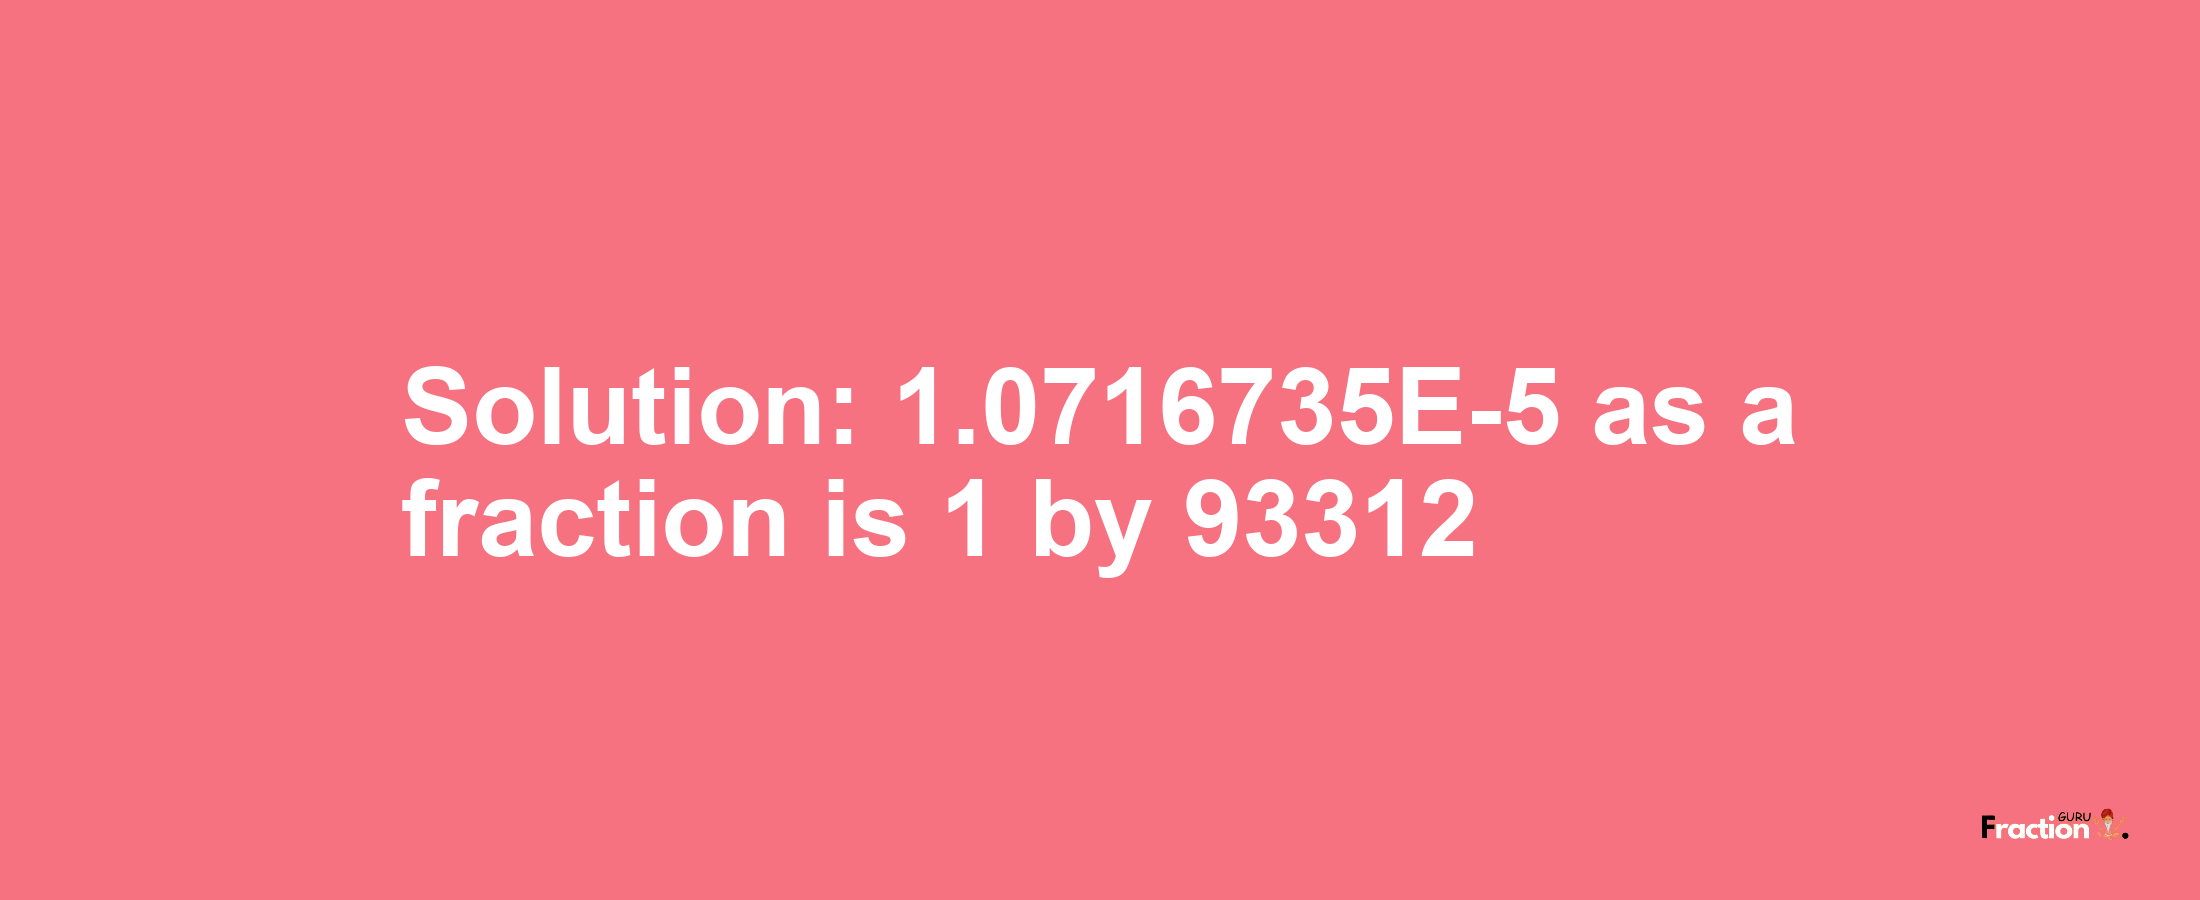 Solution:1.0716735E-5 as a fraction is 1/93312